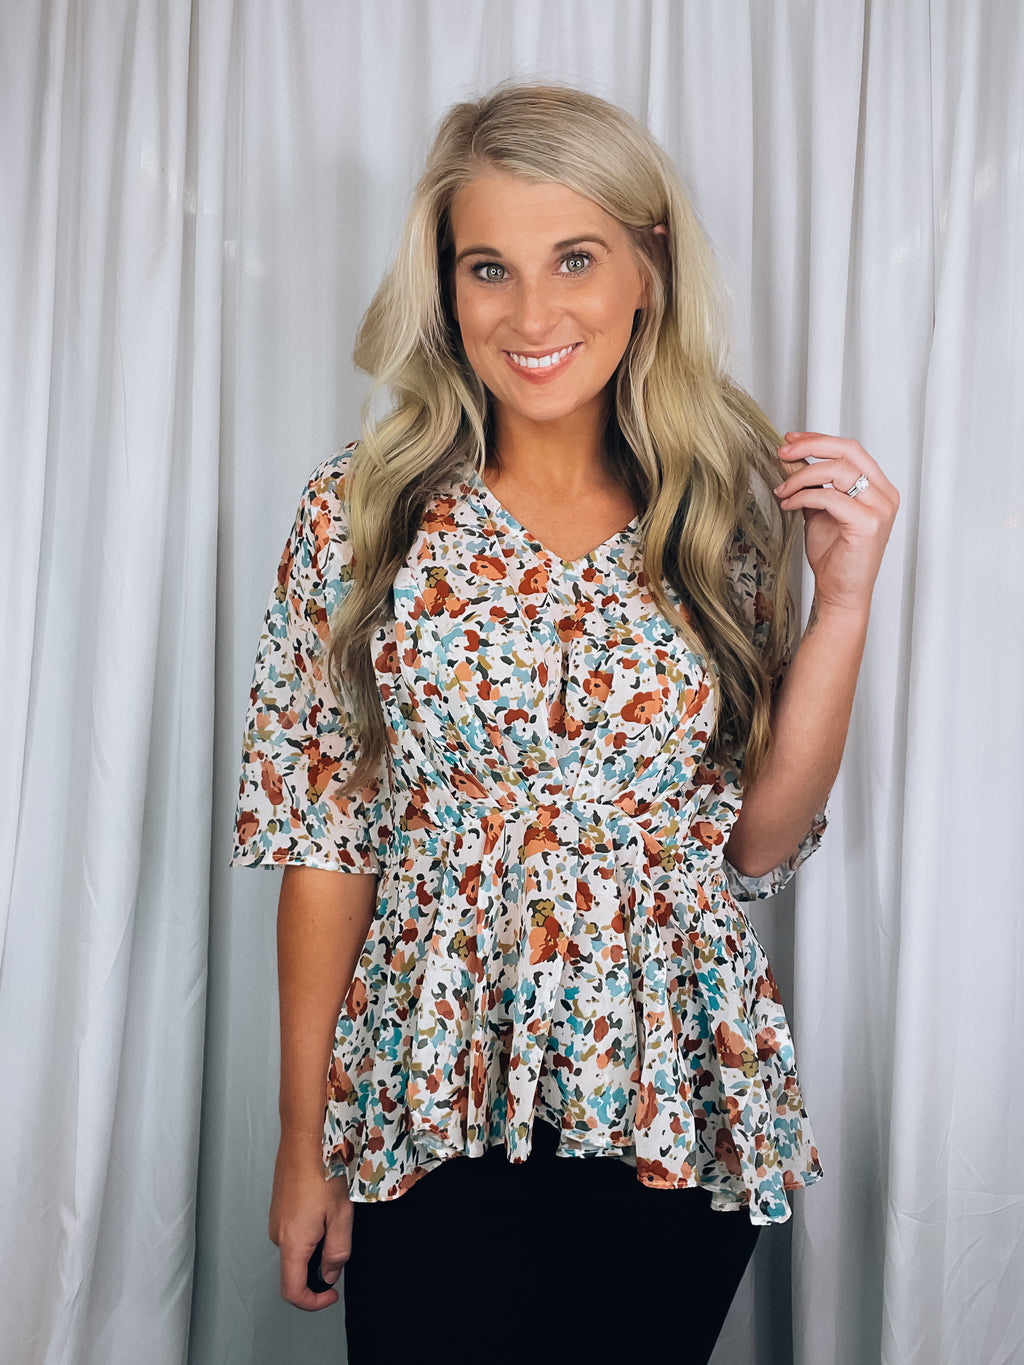 Top features a light base, multi color floral print, short kimono sleeves, V-neck line and runs true to size!   *Is a tad sheer so we recommend wearing only a nude bra* 